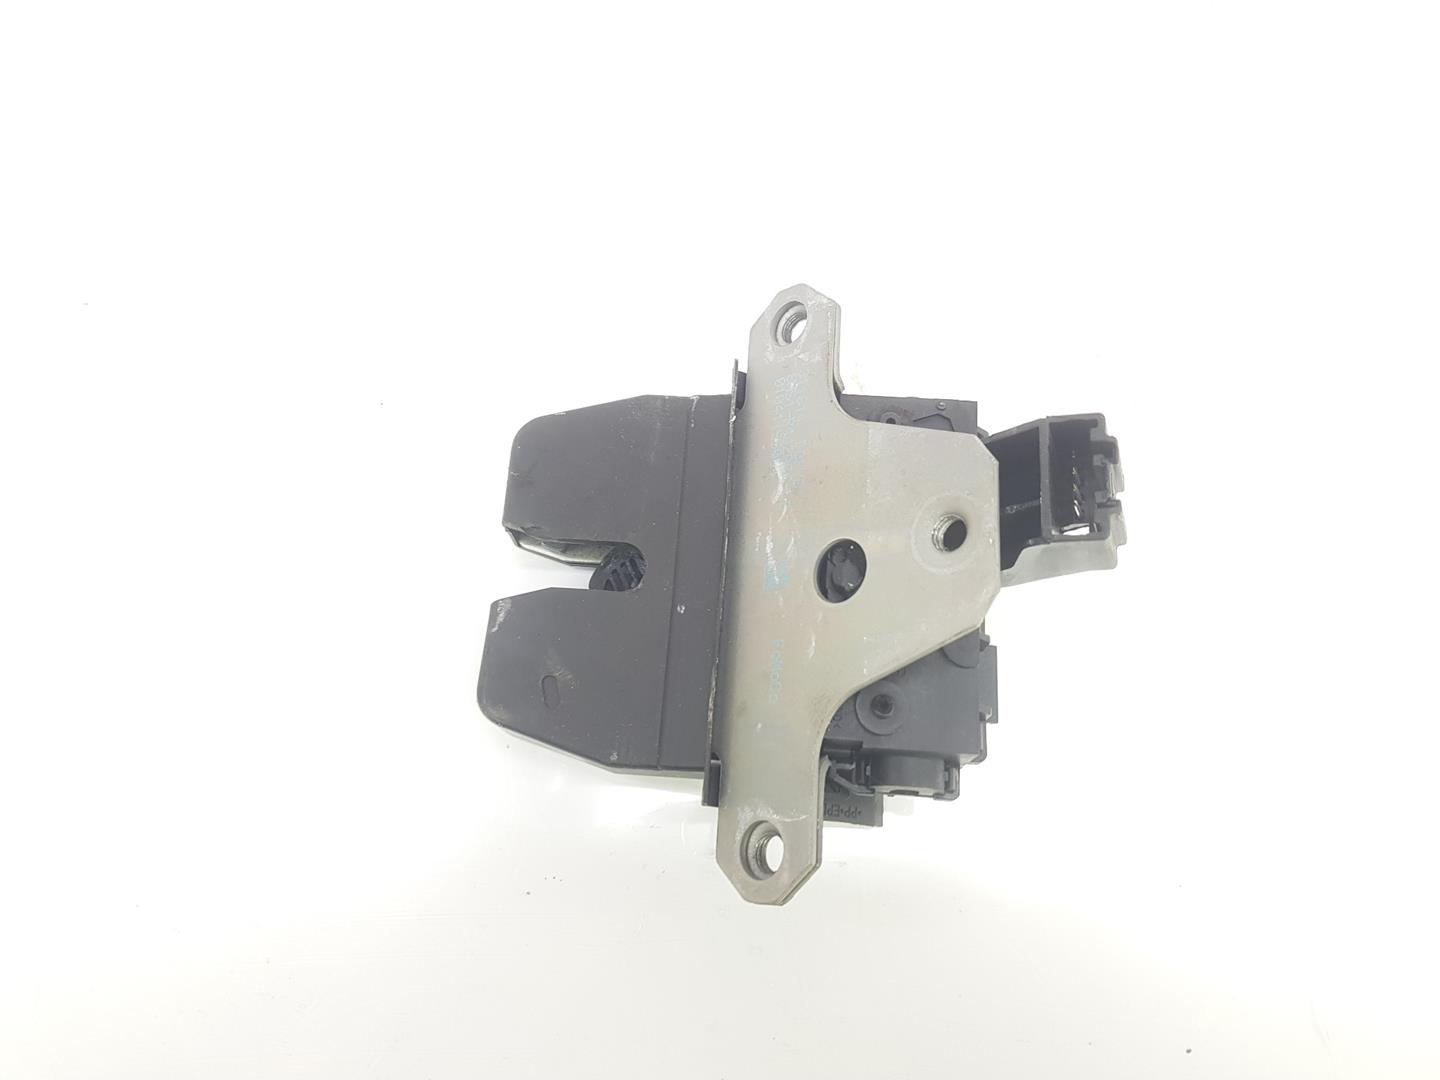 FORD Focus 3 generation (2011-2020) Tailgate Boot Lock 1920840, 8M51R442A66DC 19899690